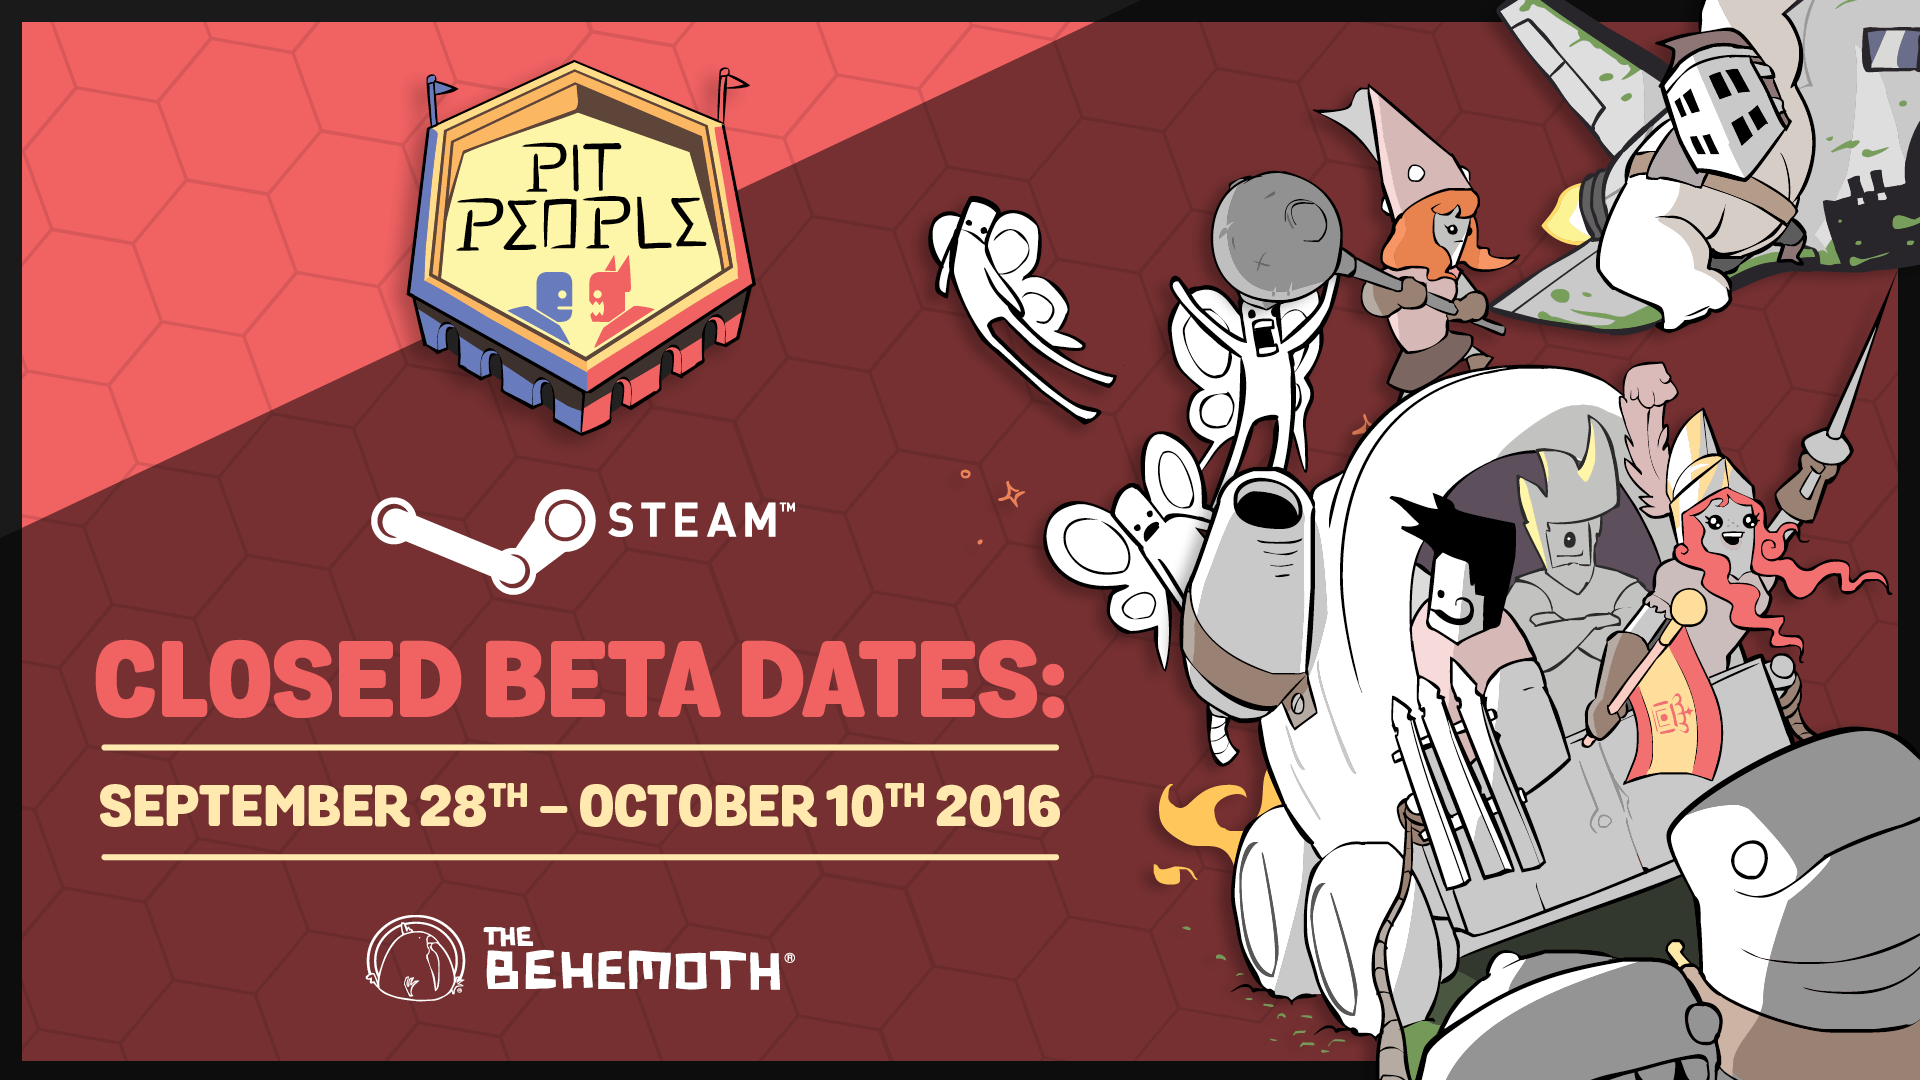 pit people steam download